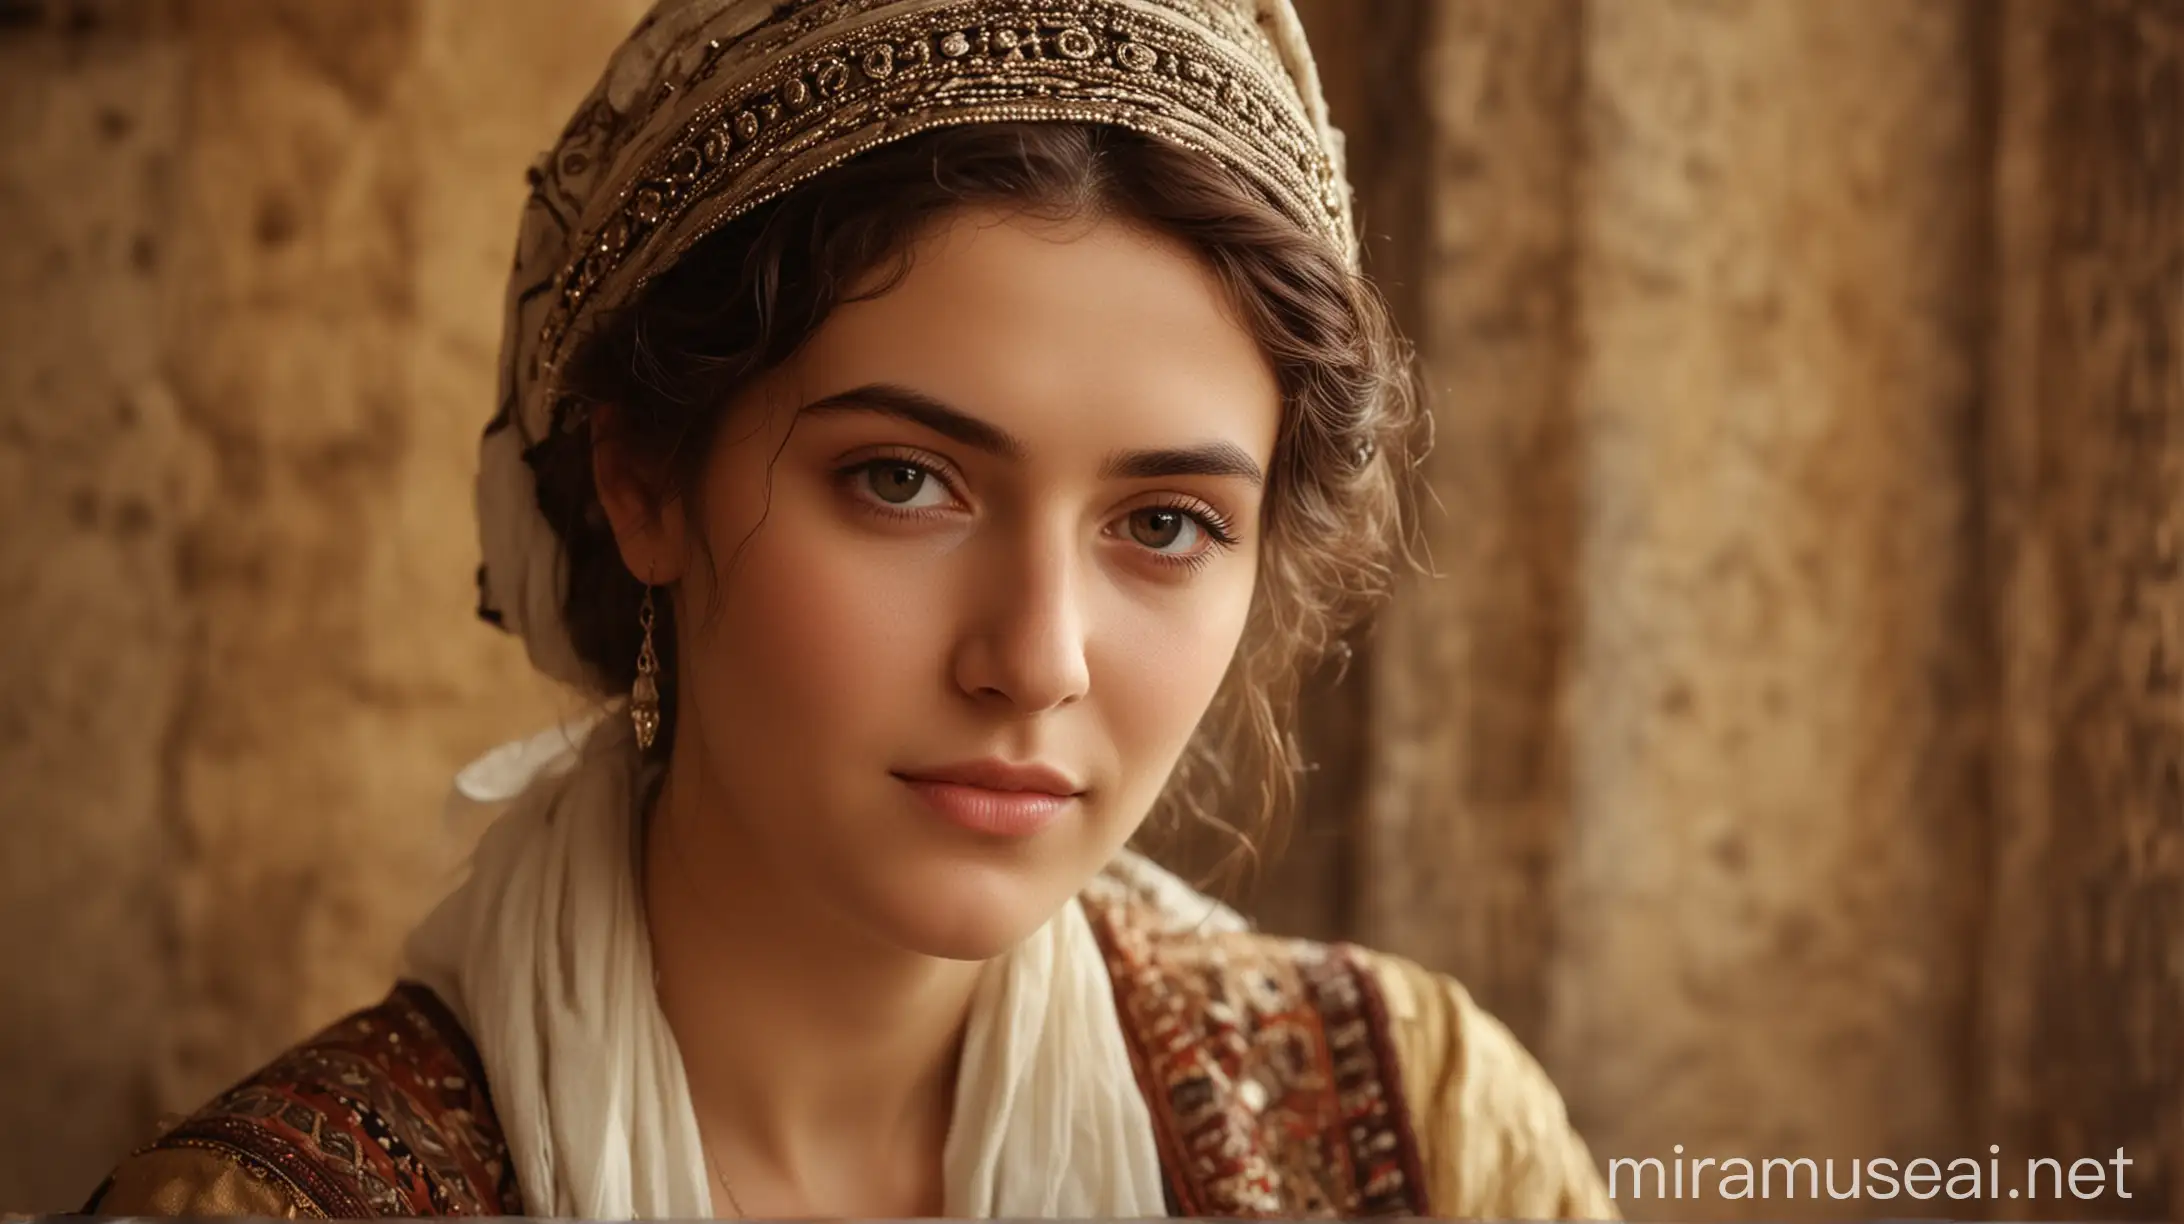 Beautiful Jewish Lady in Ancient World Atmosphere